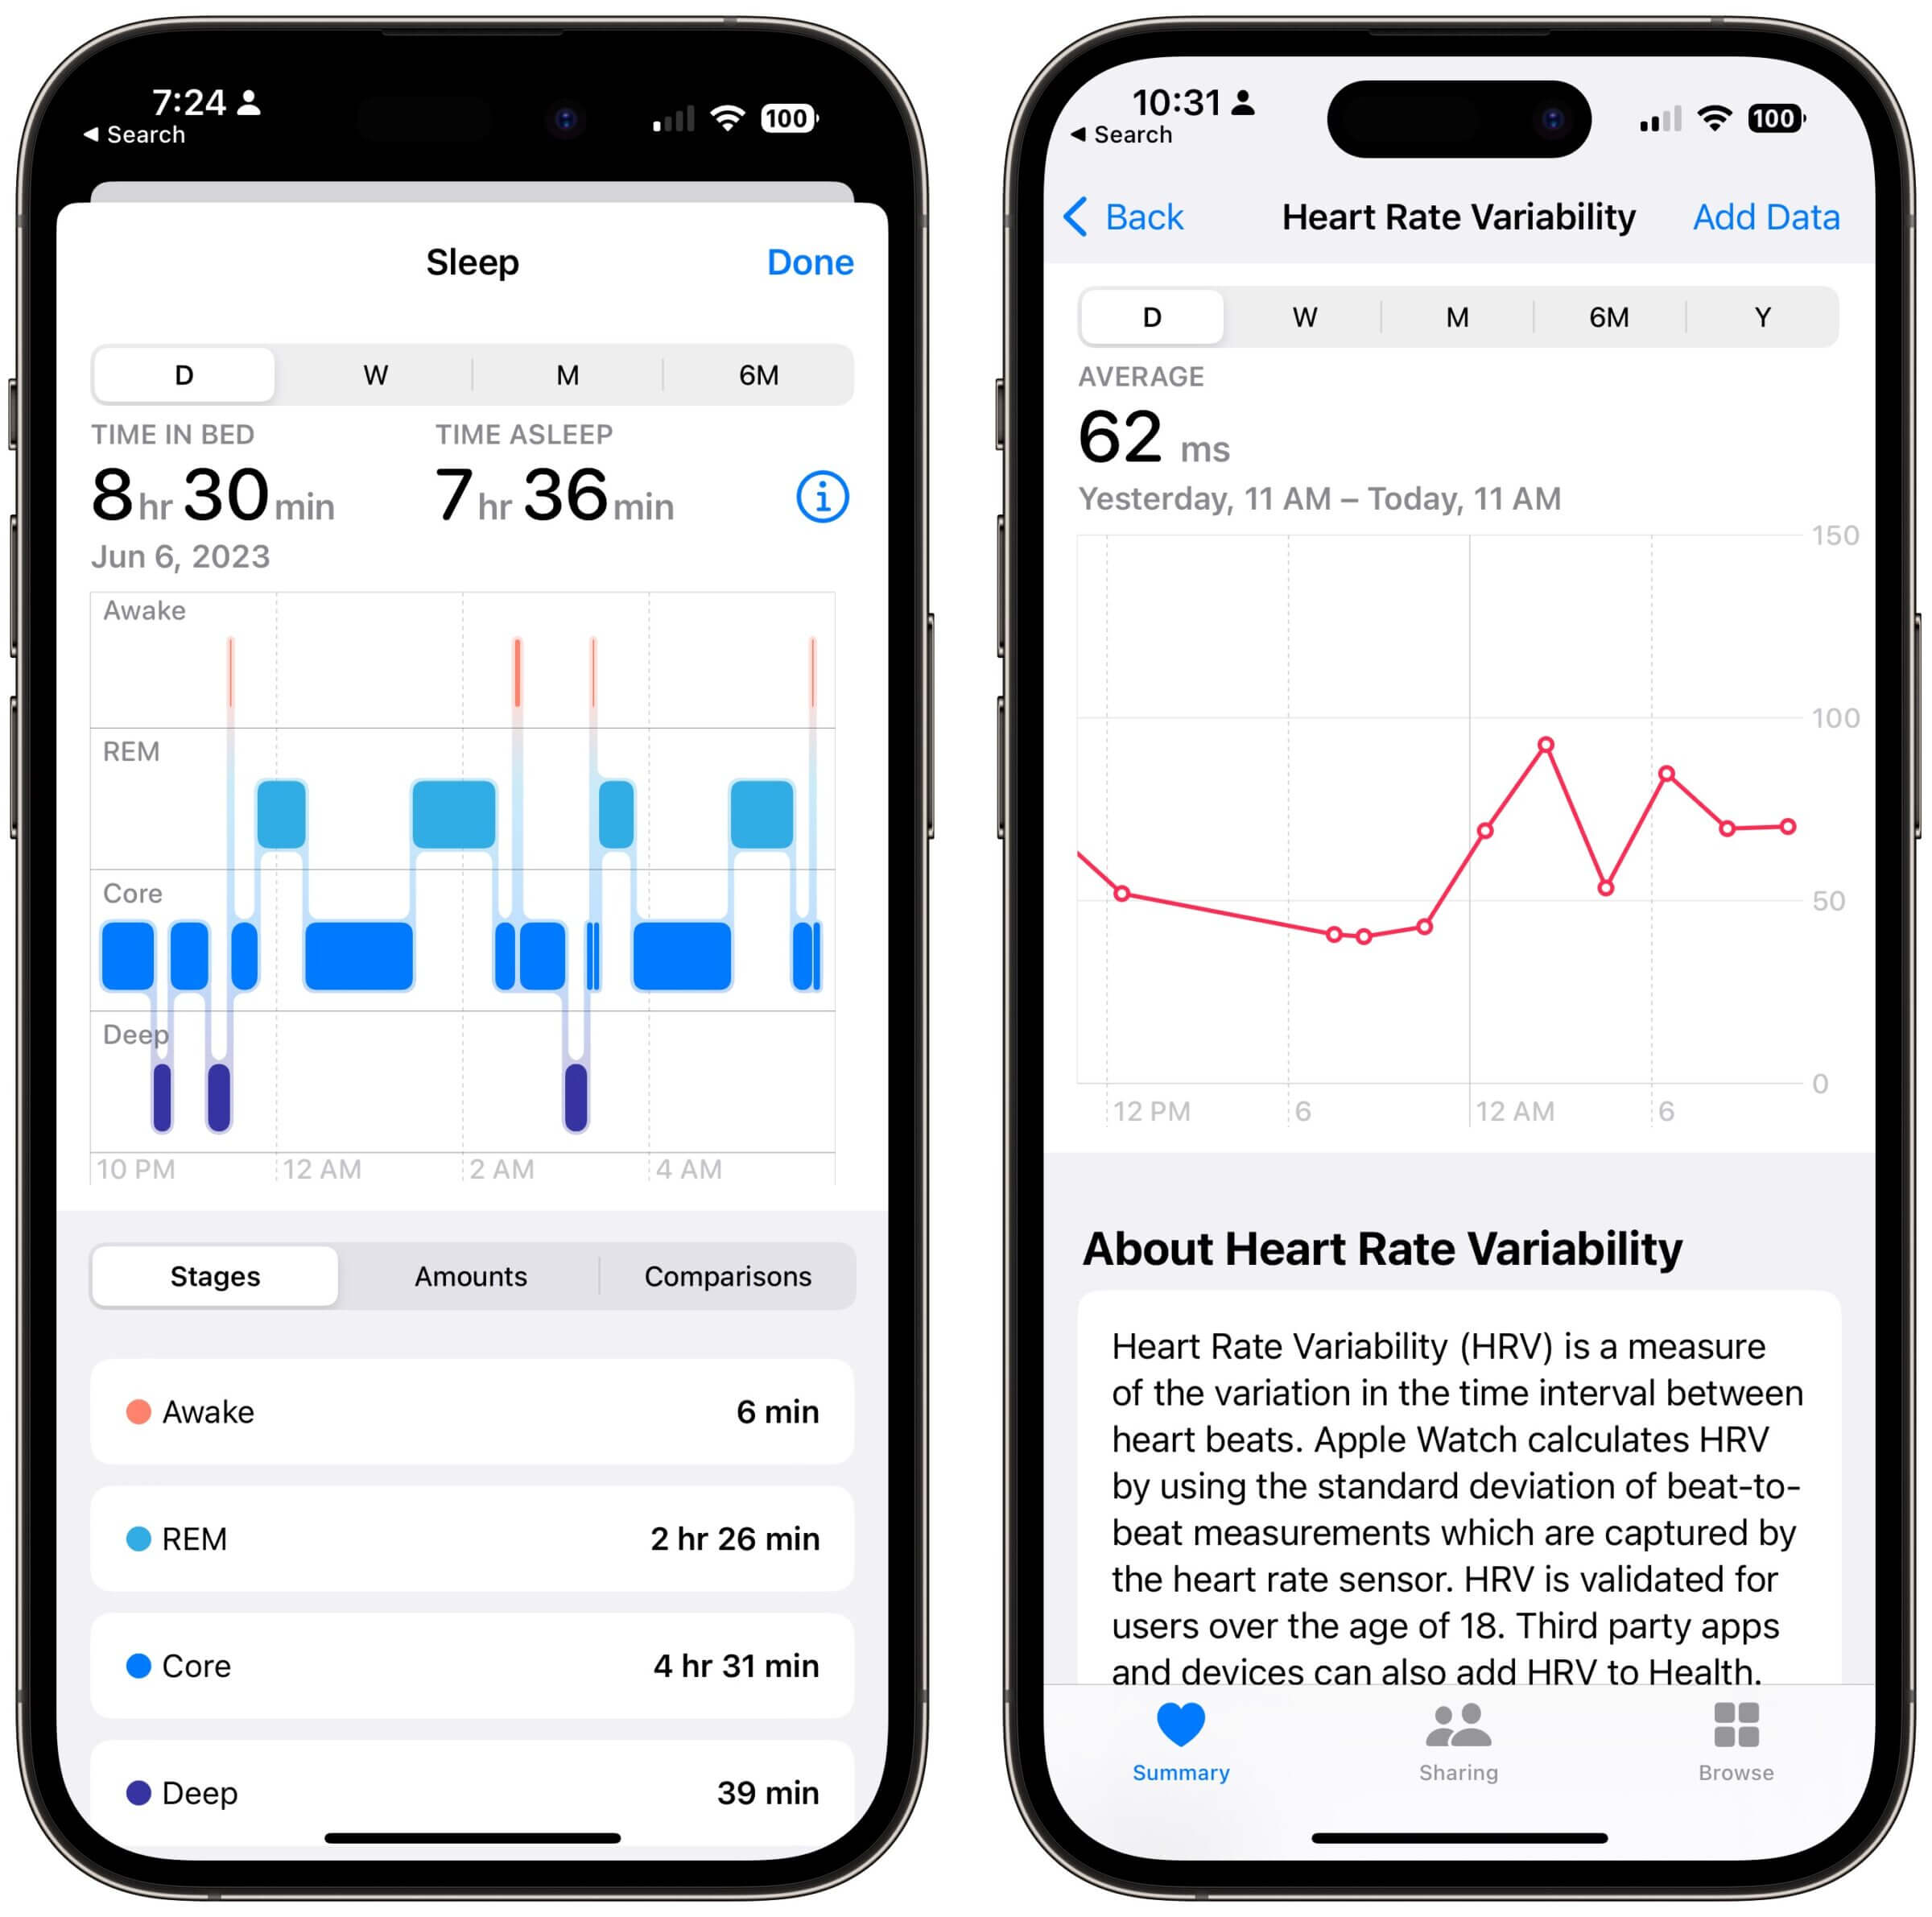 Apollo has helped me spend more time in the restorative phases of sleep (left) and increase my HRV (right).